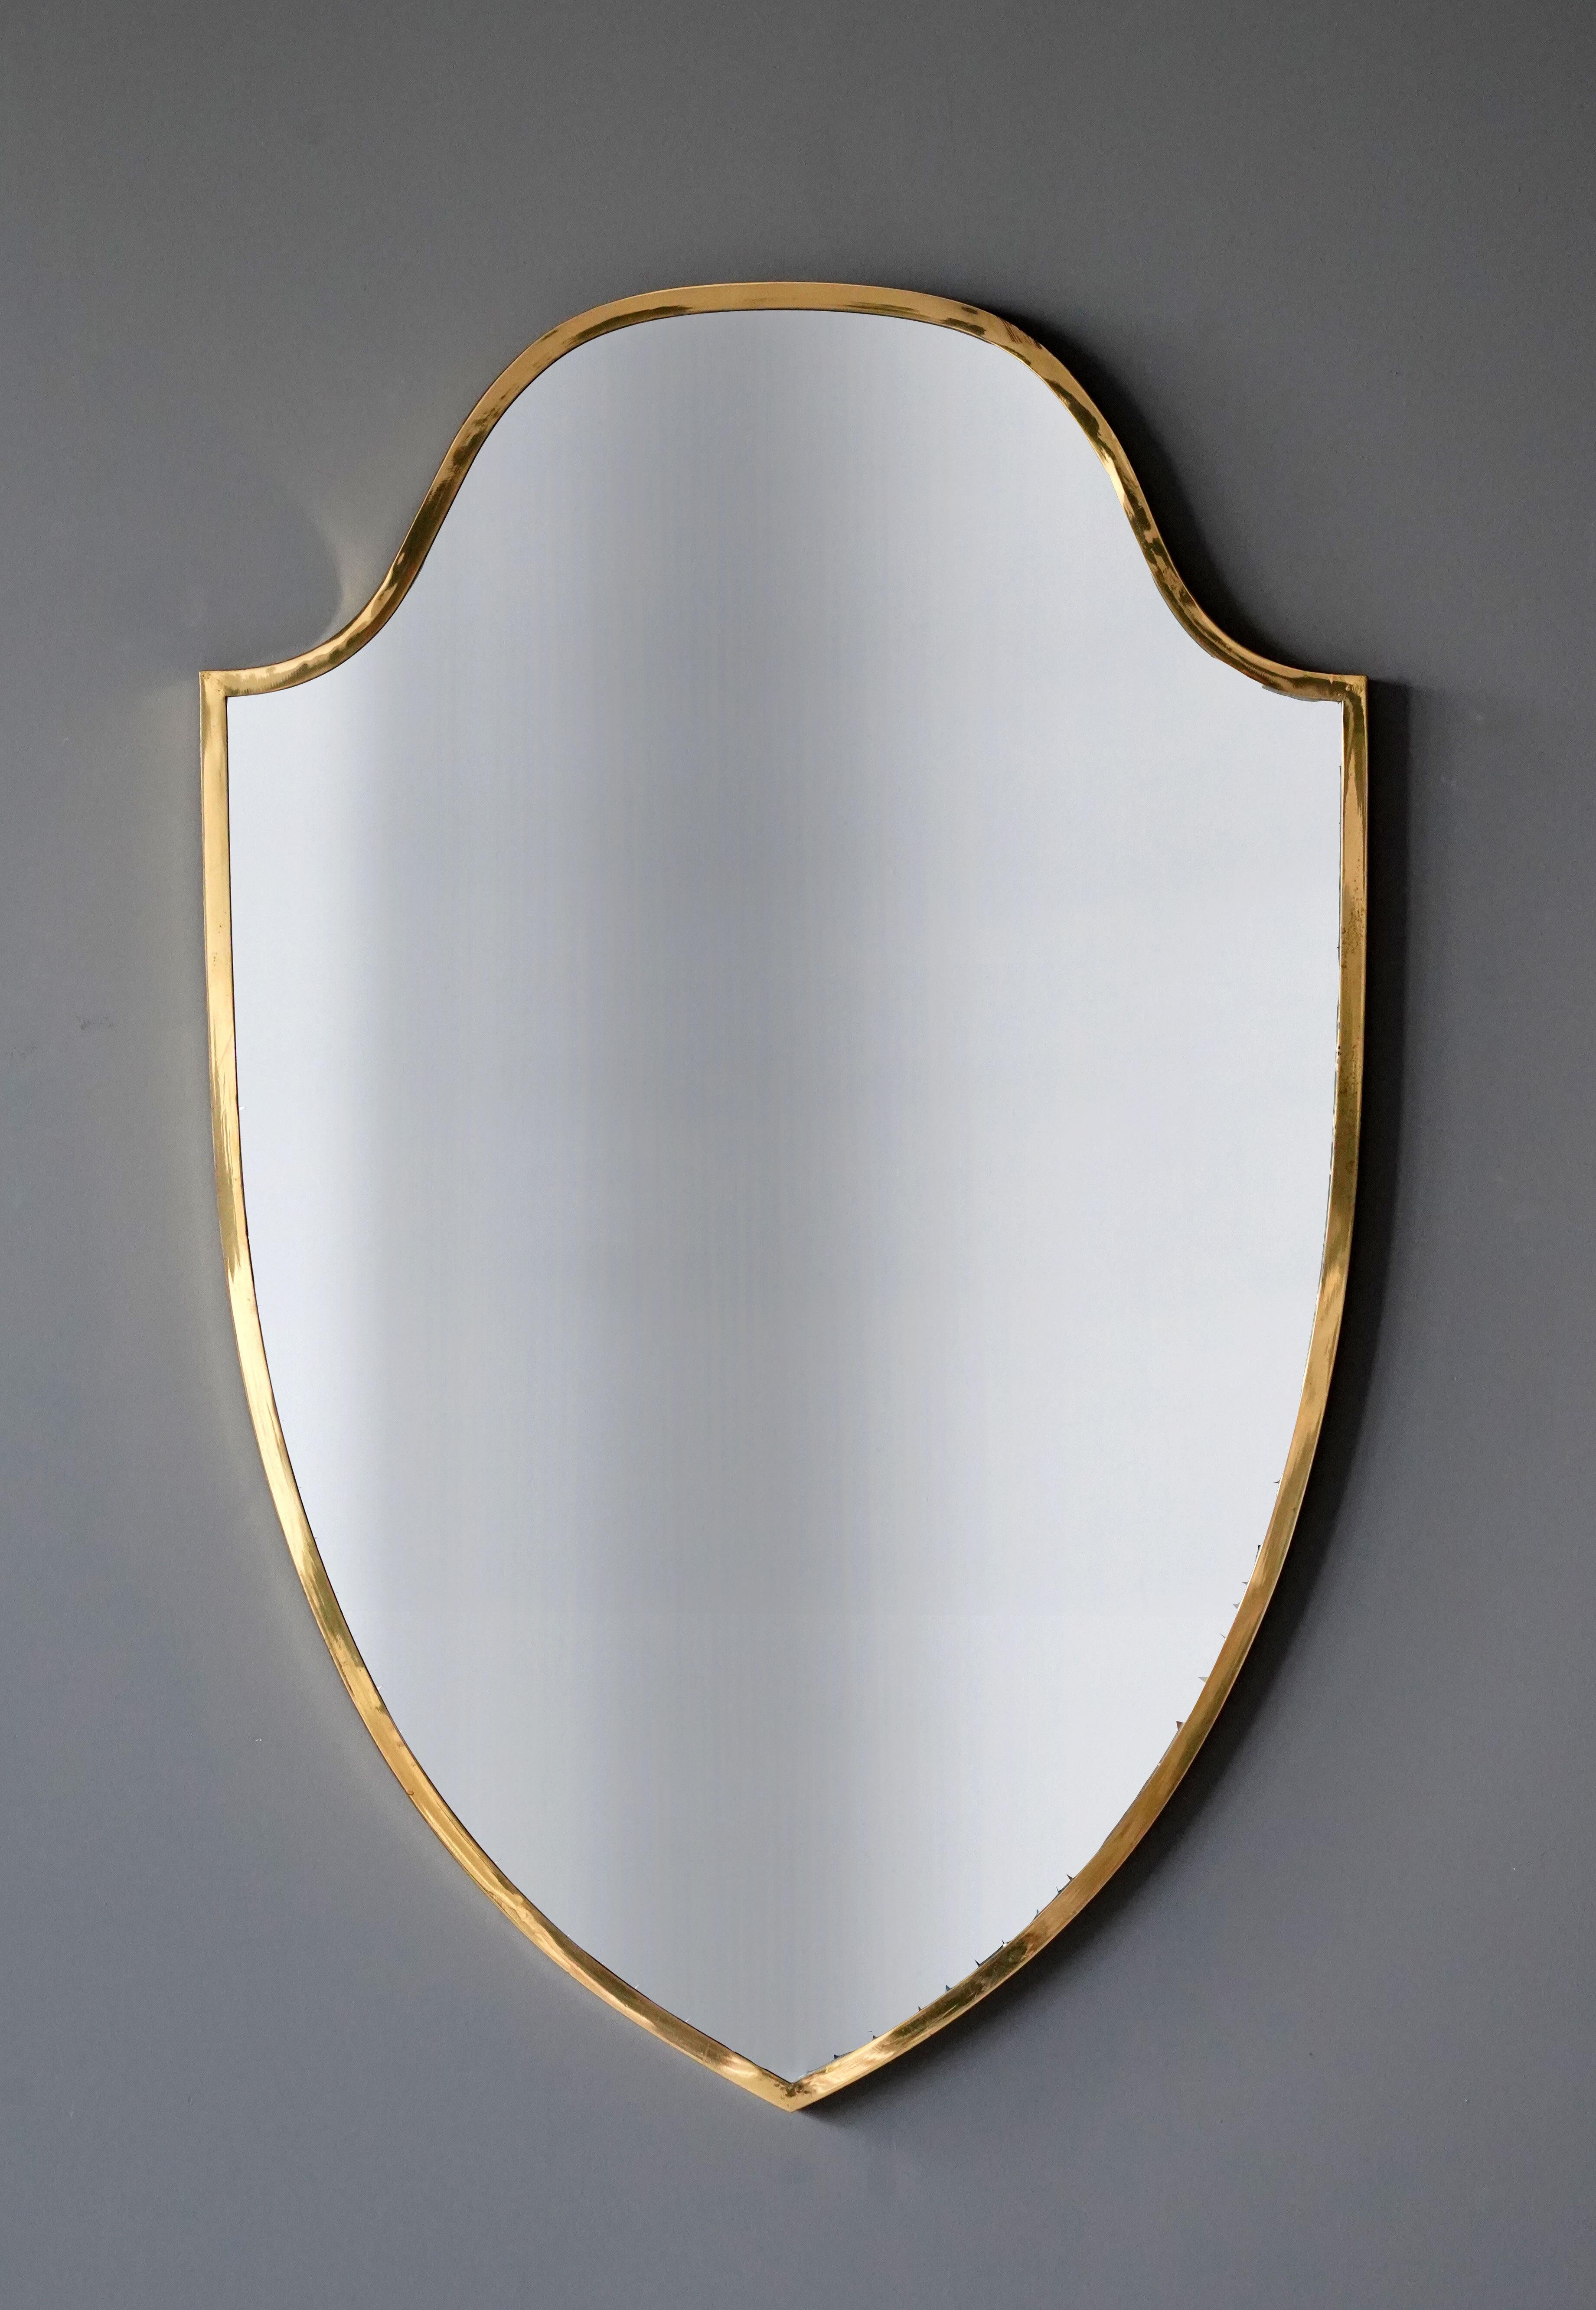 A wall mirror, produced in Italy, 1960s. Cut mirror glass is framed in brass frame.

Other designers of the period include Gio Ponti, Fontana Arte, Paolo Buffa, Franco Albini, and Jean Royere.